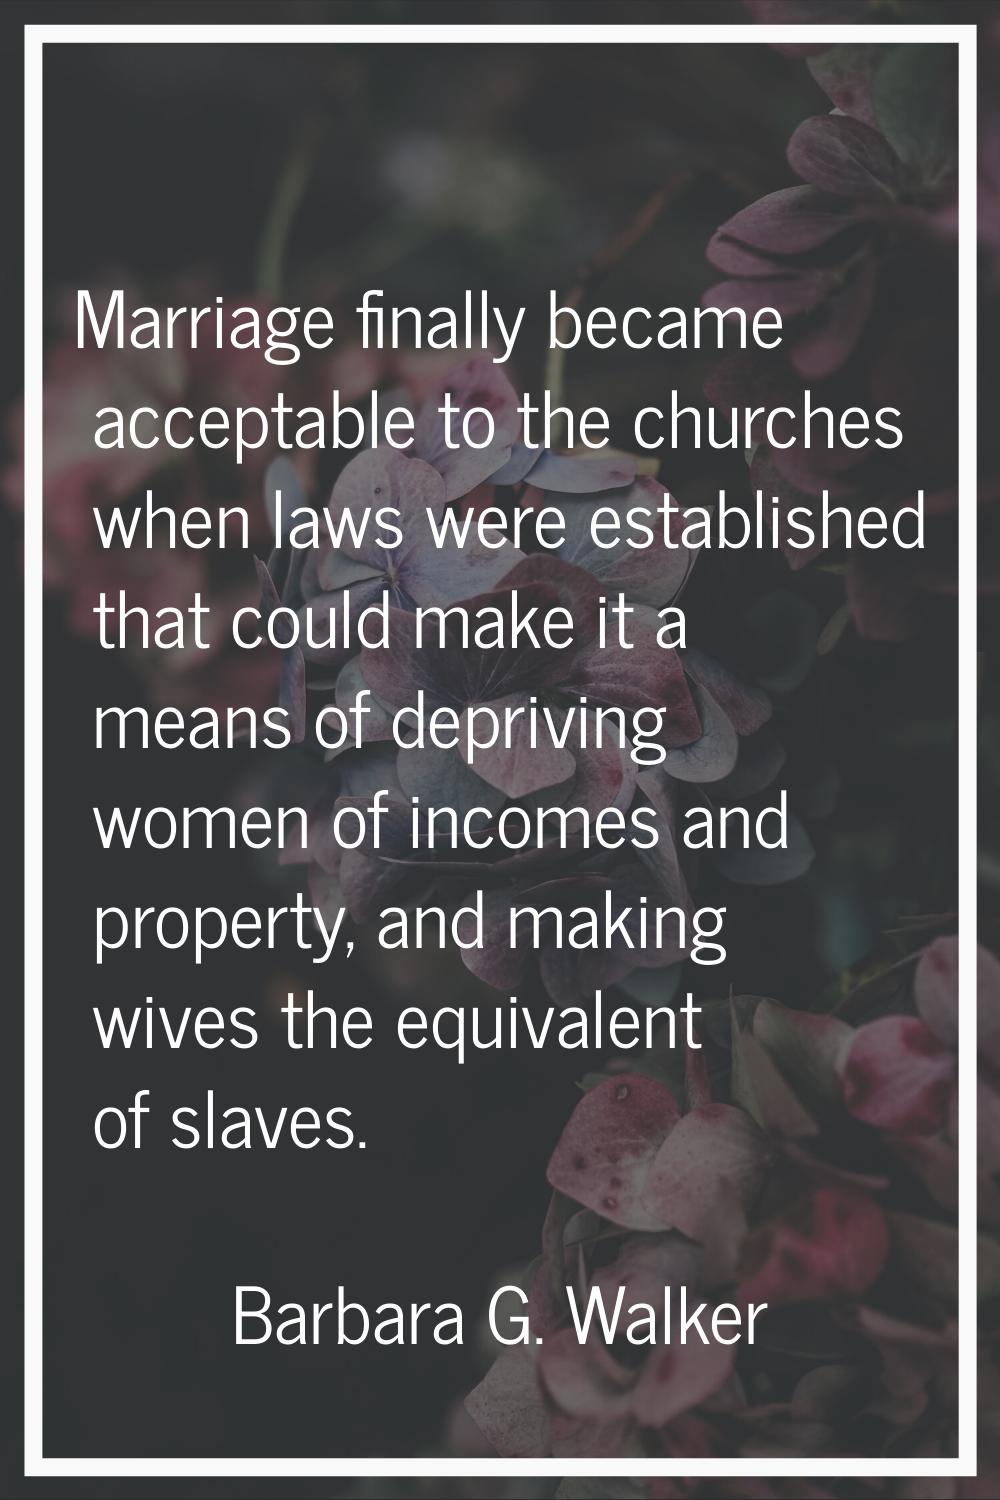 Marriage finally became acceptable to the churches when laws were established that could make it a 